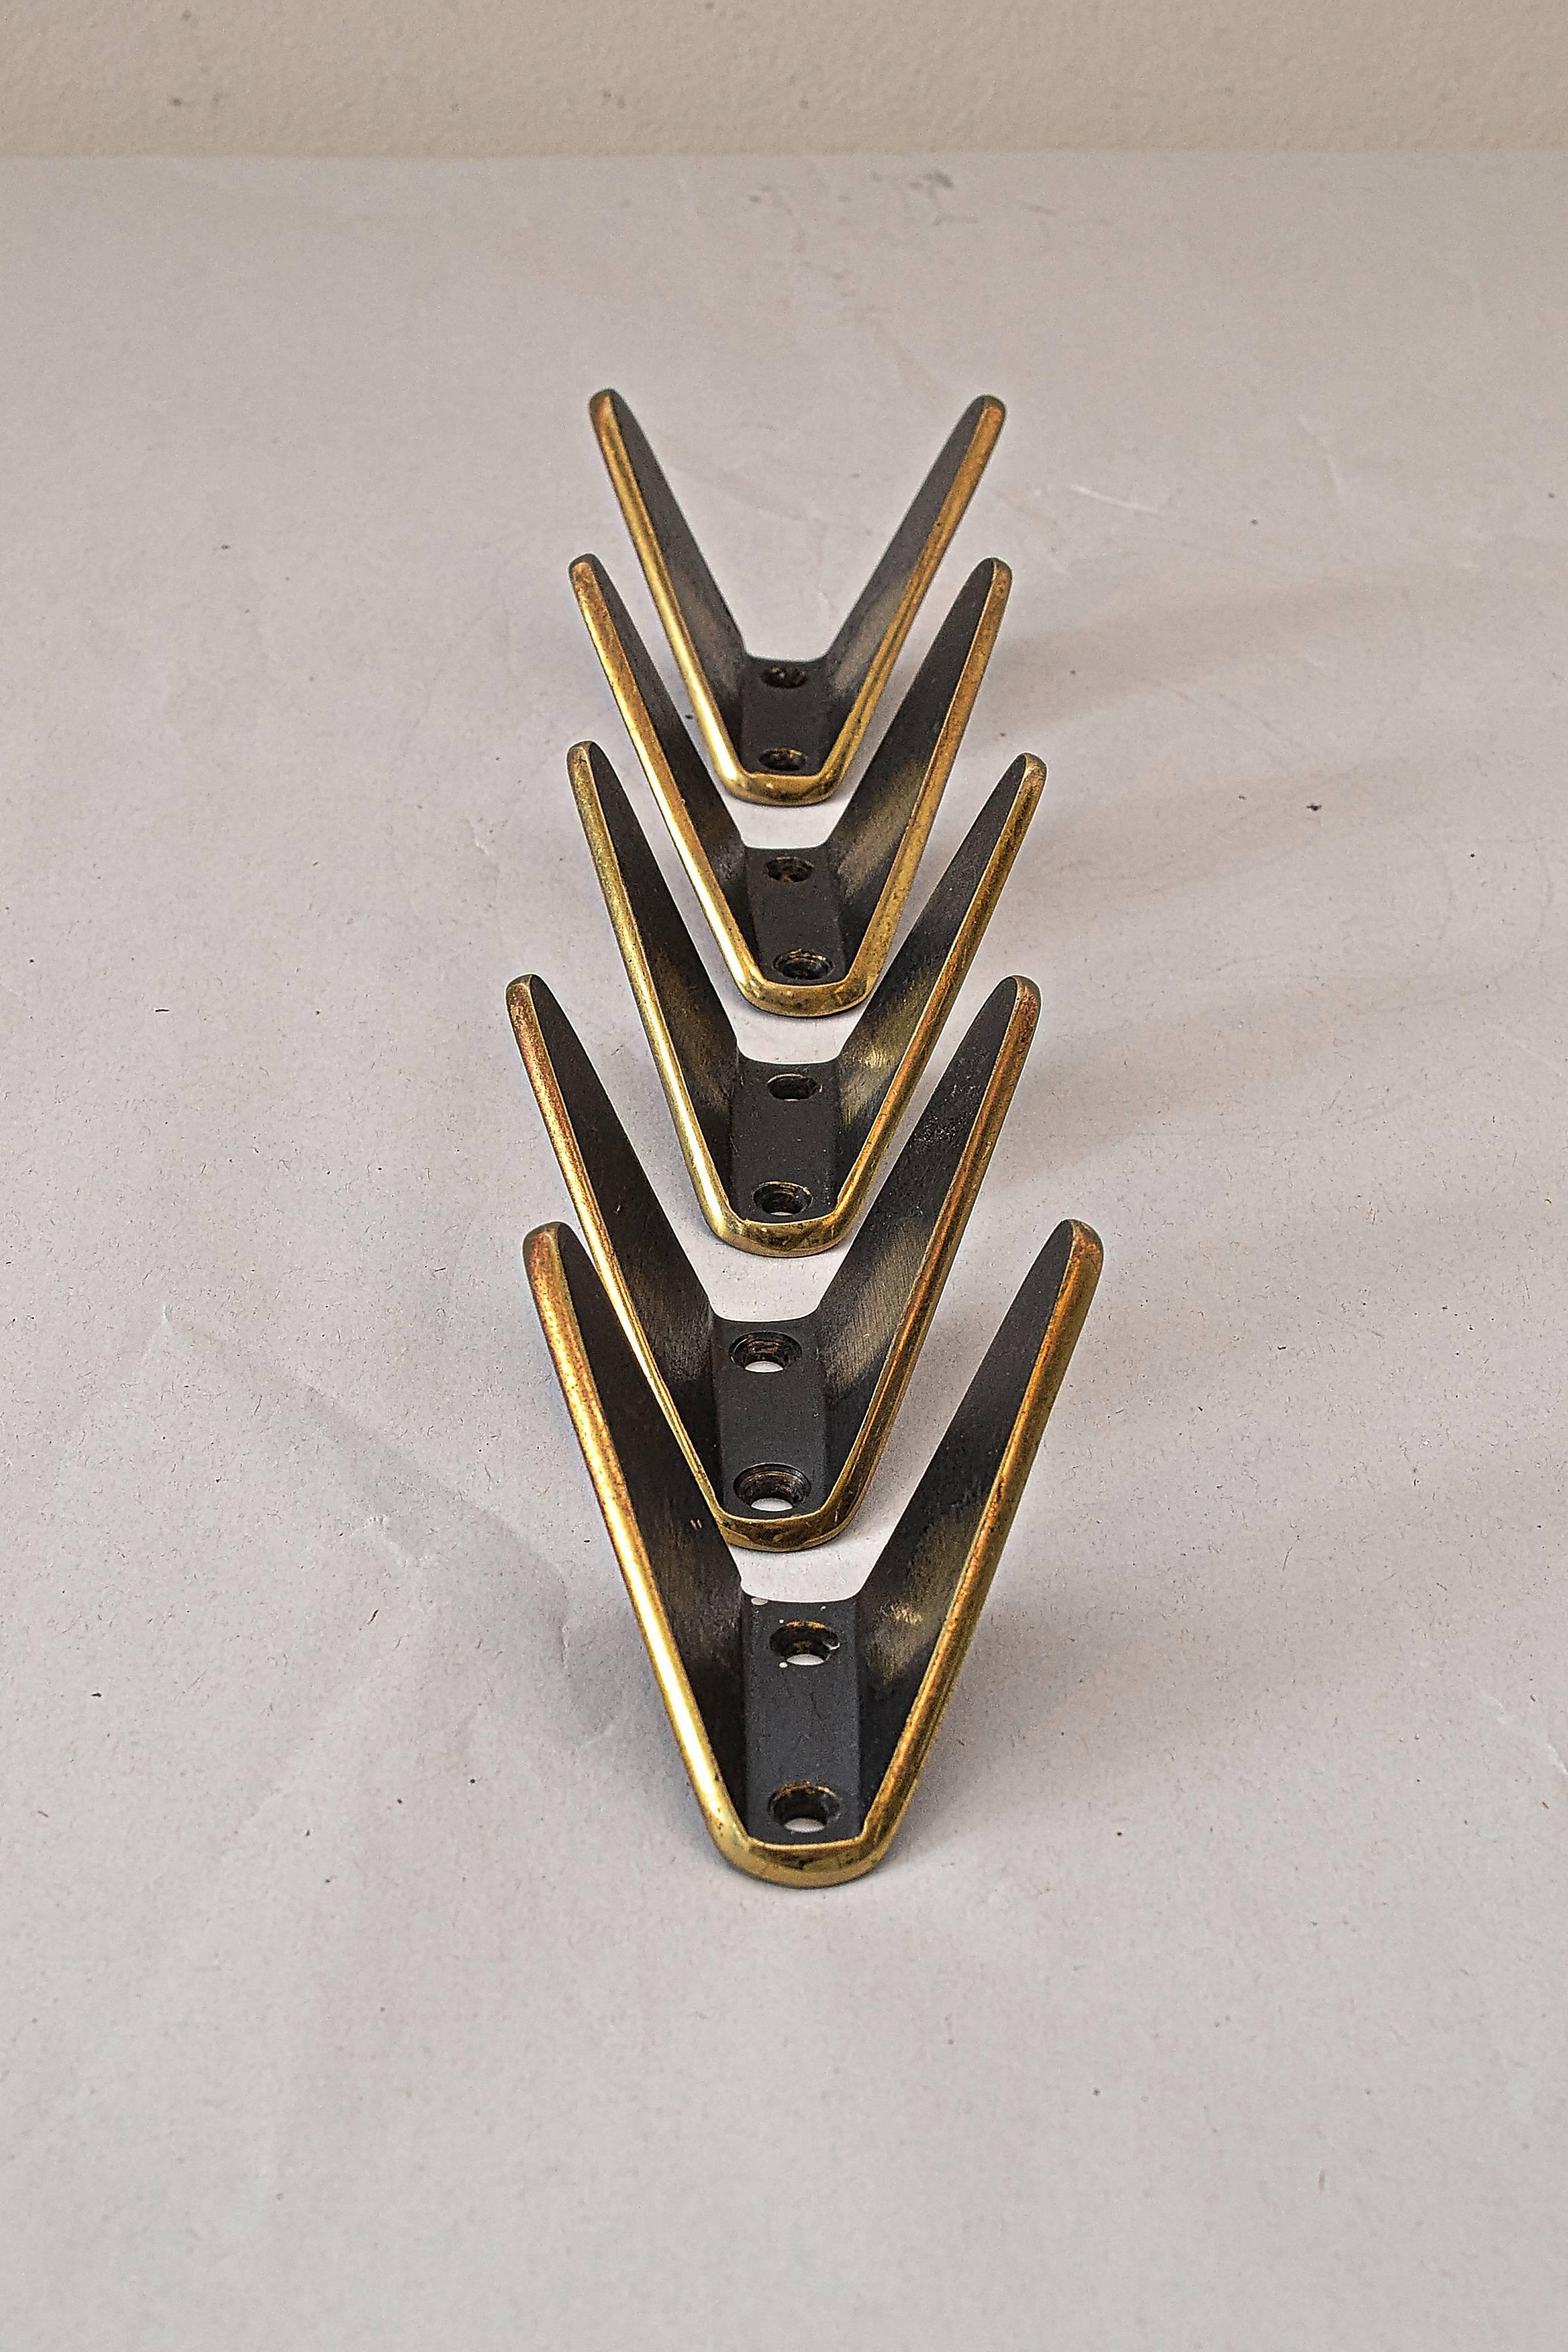 Five modernist brass wall hooks by Hertha Baller, Vienna, 1950.
Original condition.
Two have traces of use.